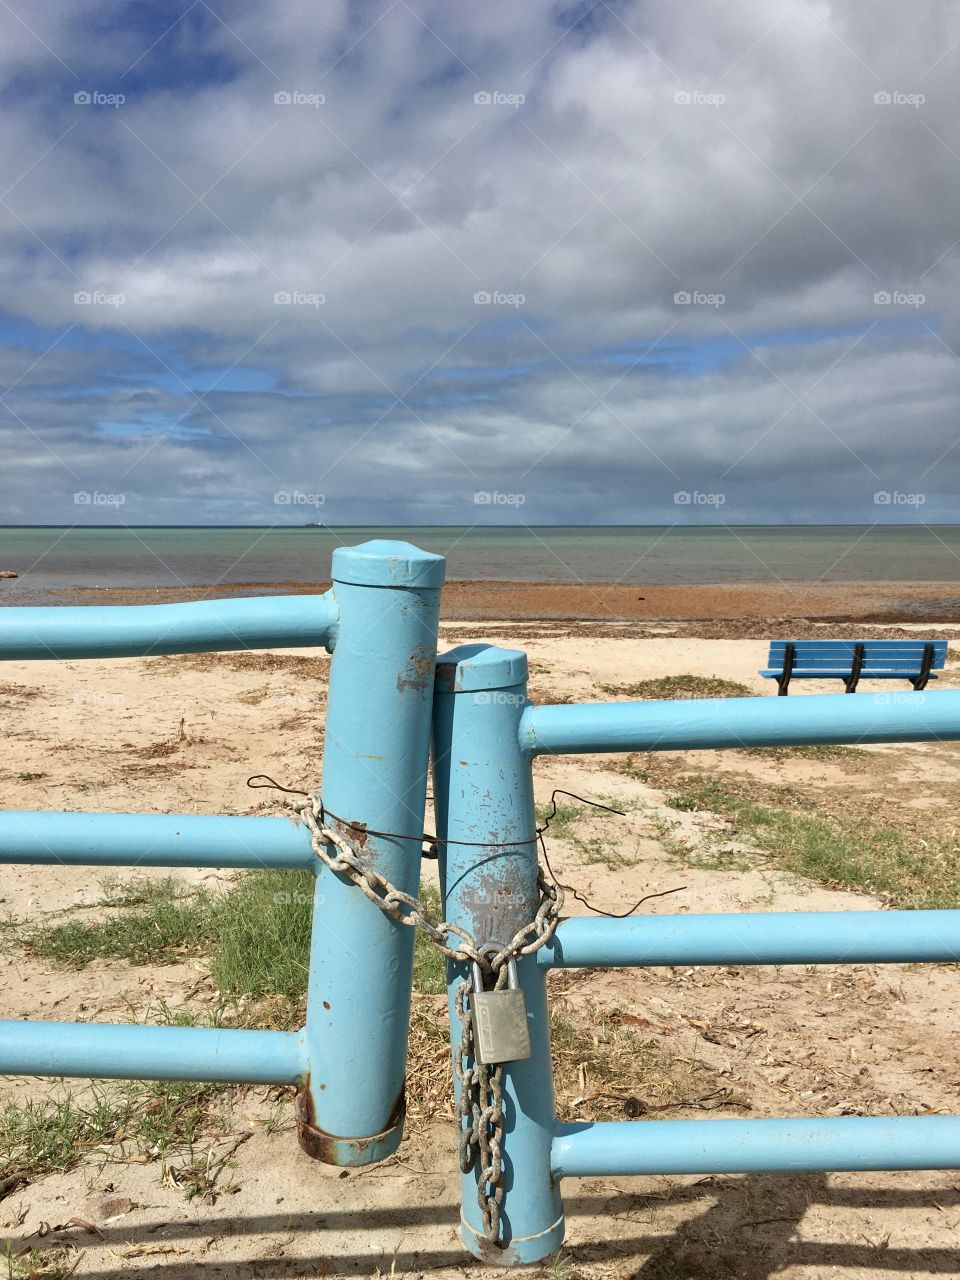 Aqua marine blue metal gate locked with padlock and chain as a barrier to vehicles entering the beach, blue bench and ocean horizon in the background